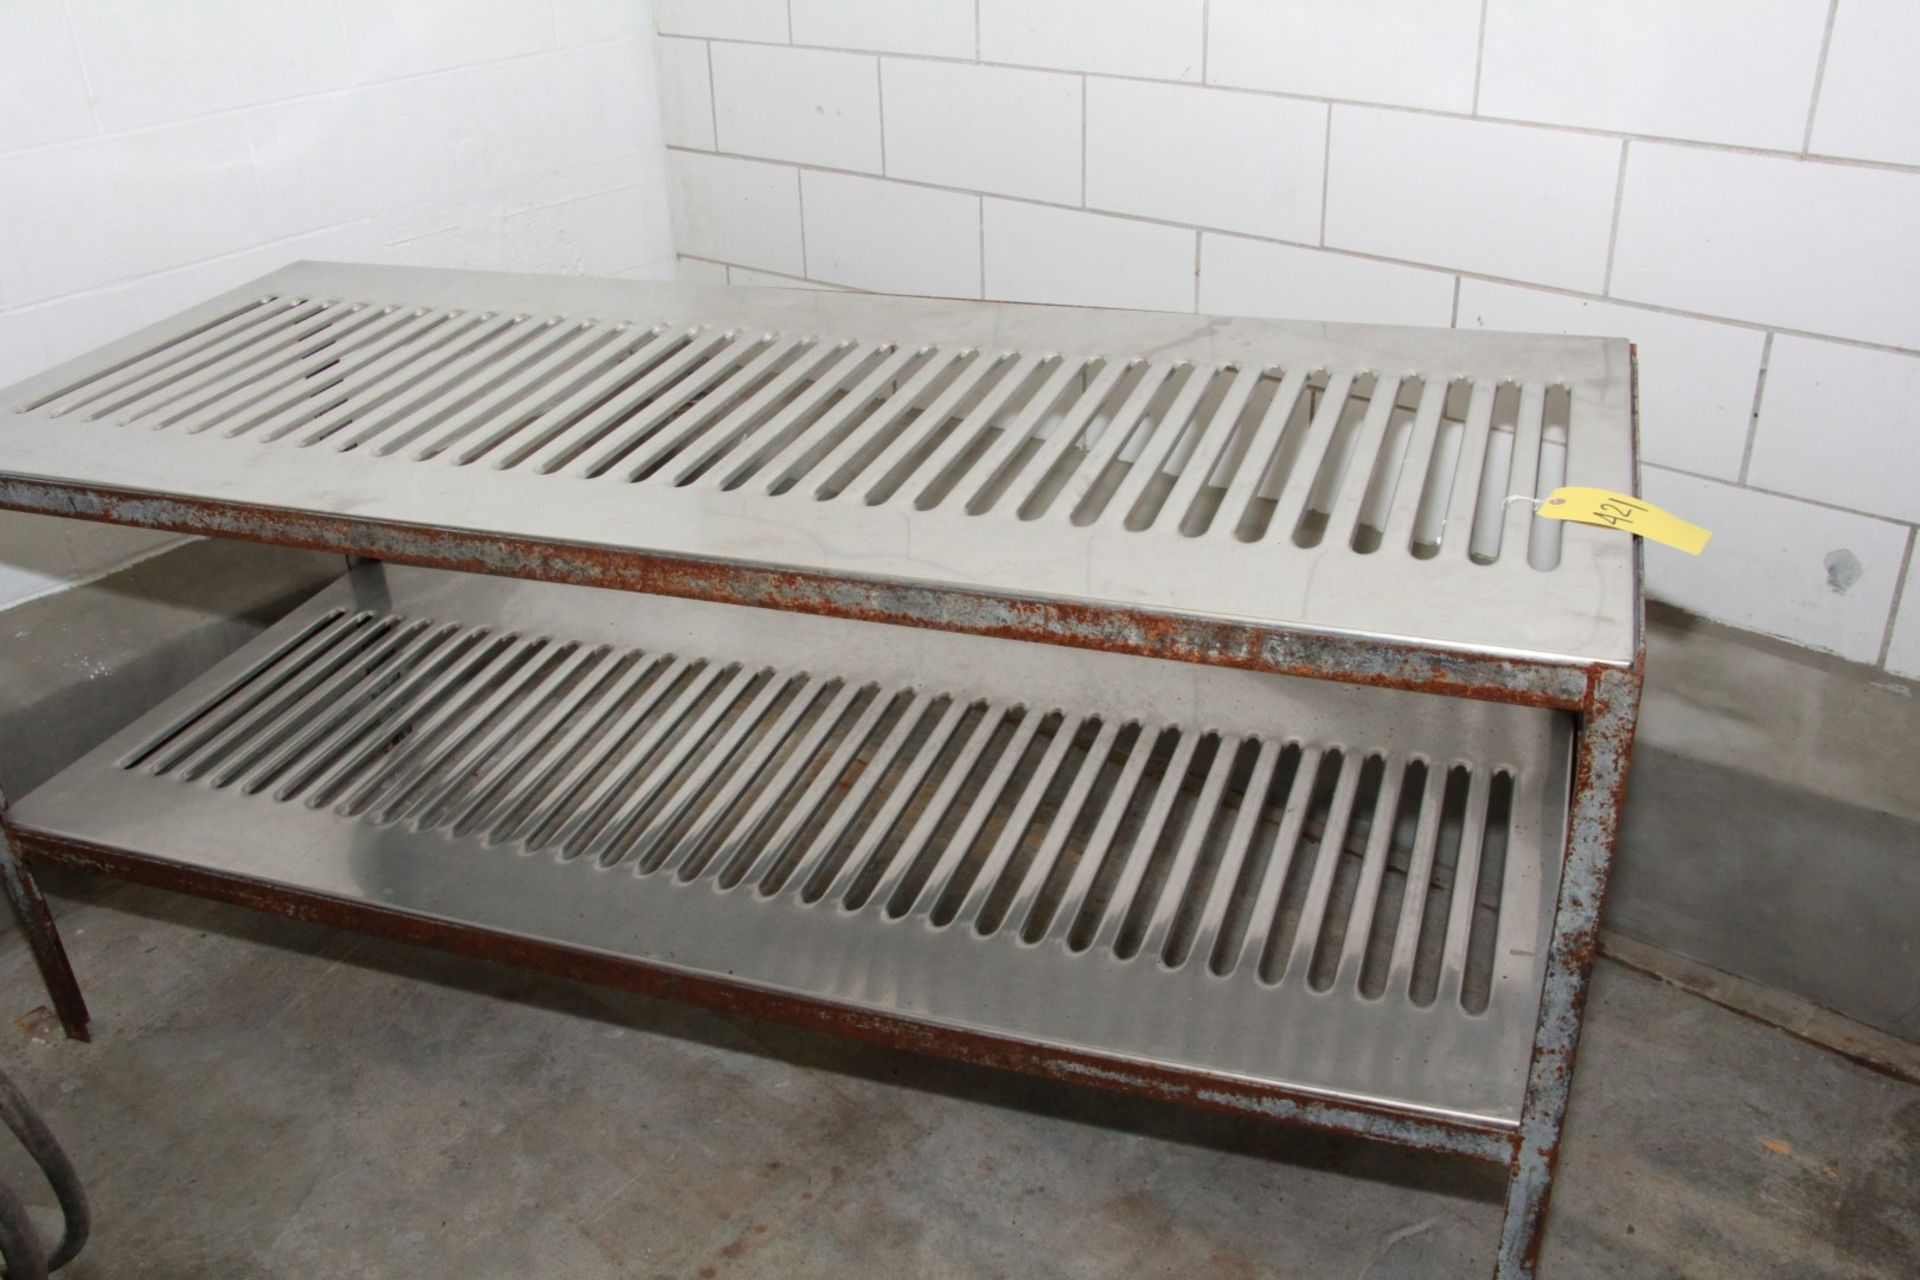 STAINLESS STEEL TABLE - SLOTTED. 30"x 72" x 29".